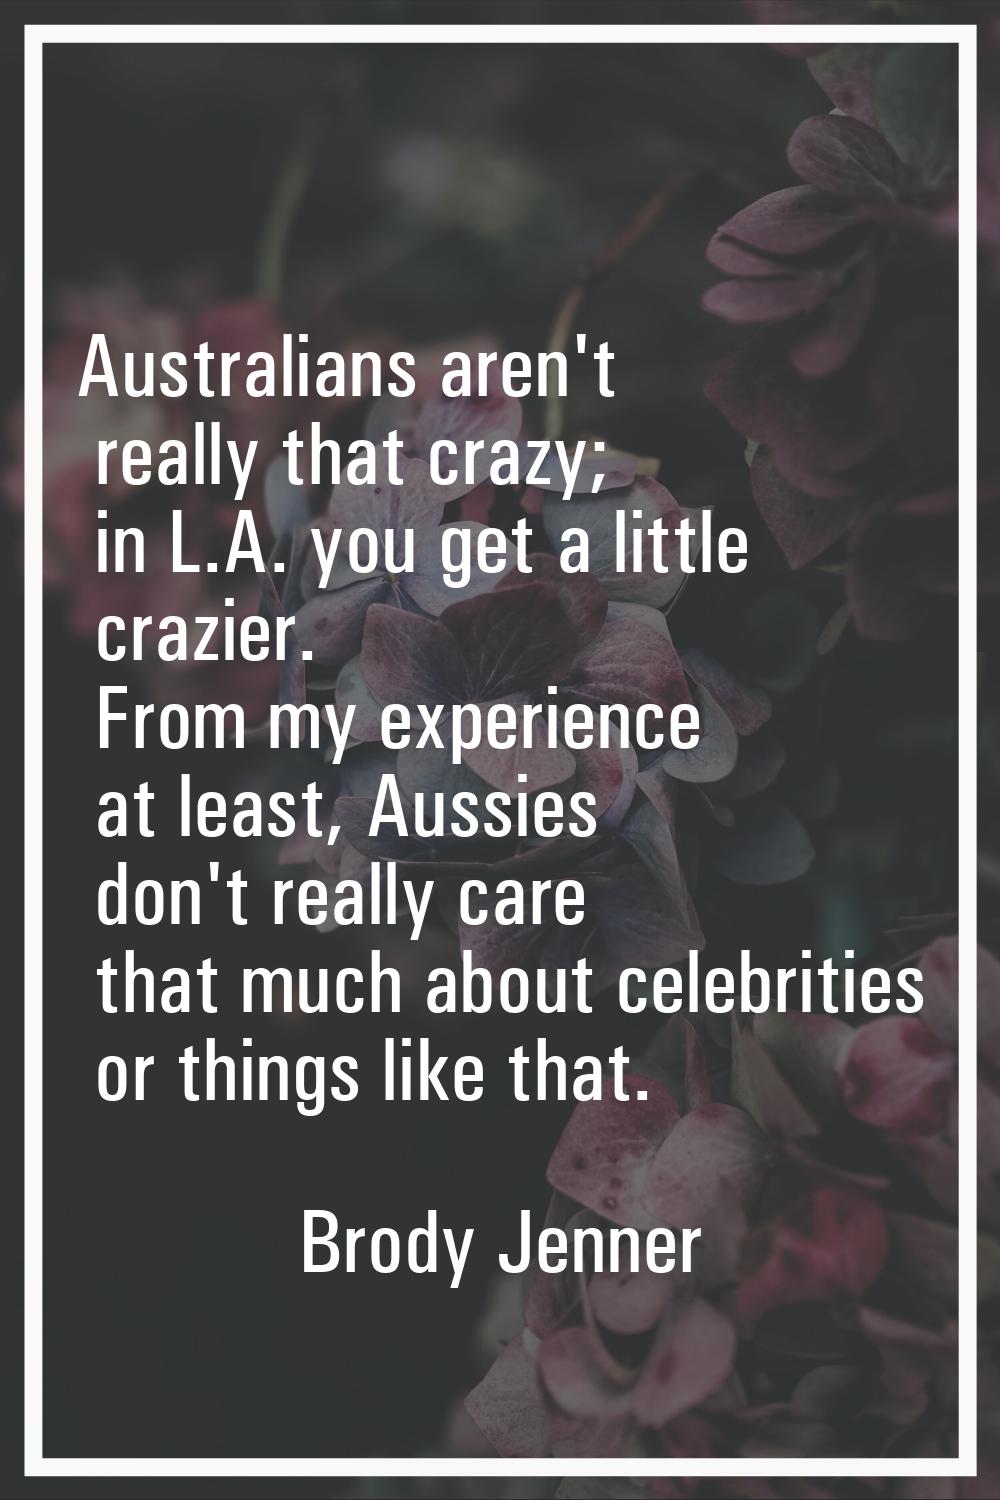 Australians aren't really that crazy; in L.A. you get a little crazier. From my experience at least